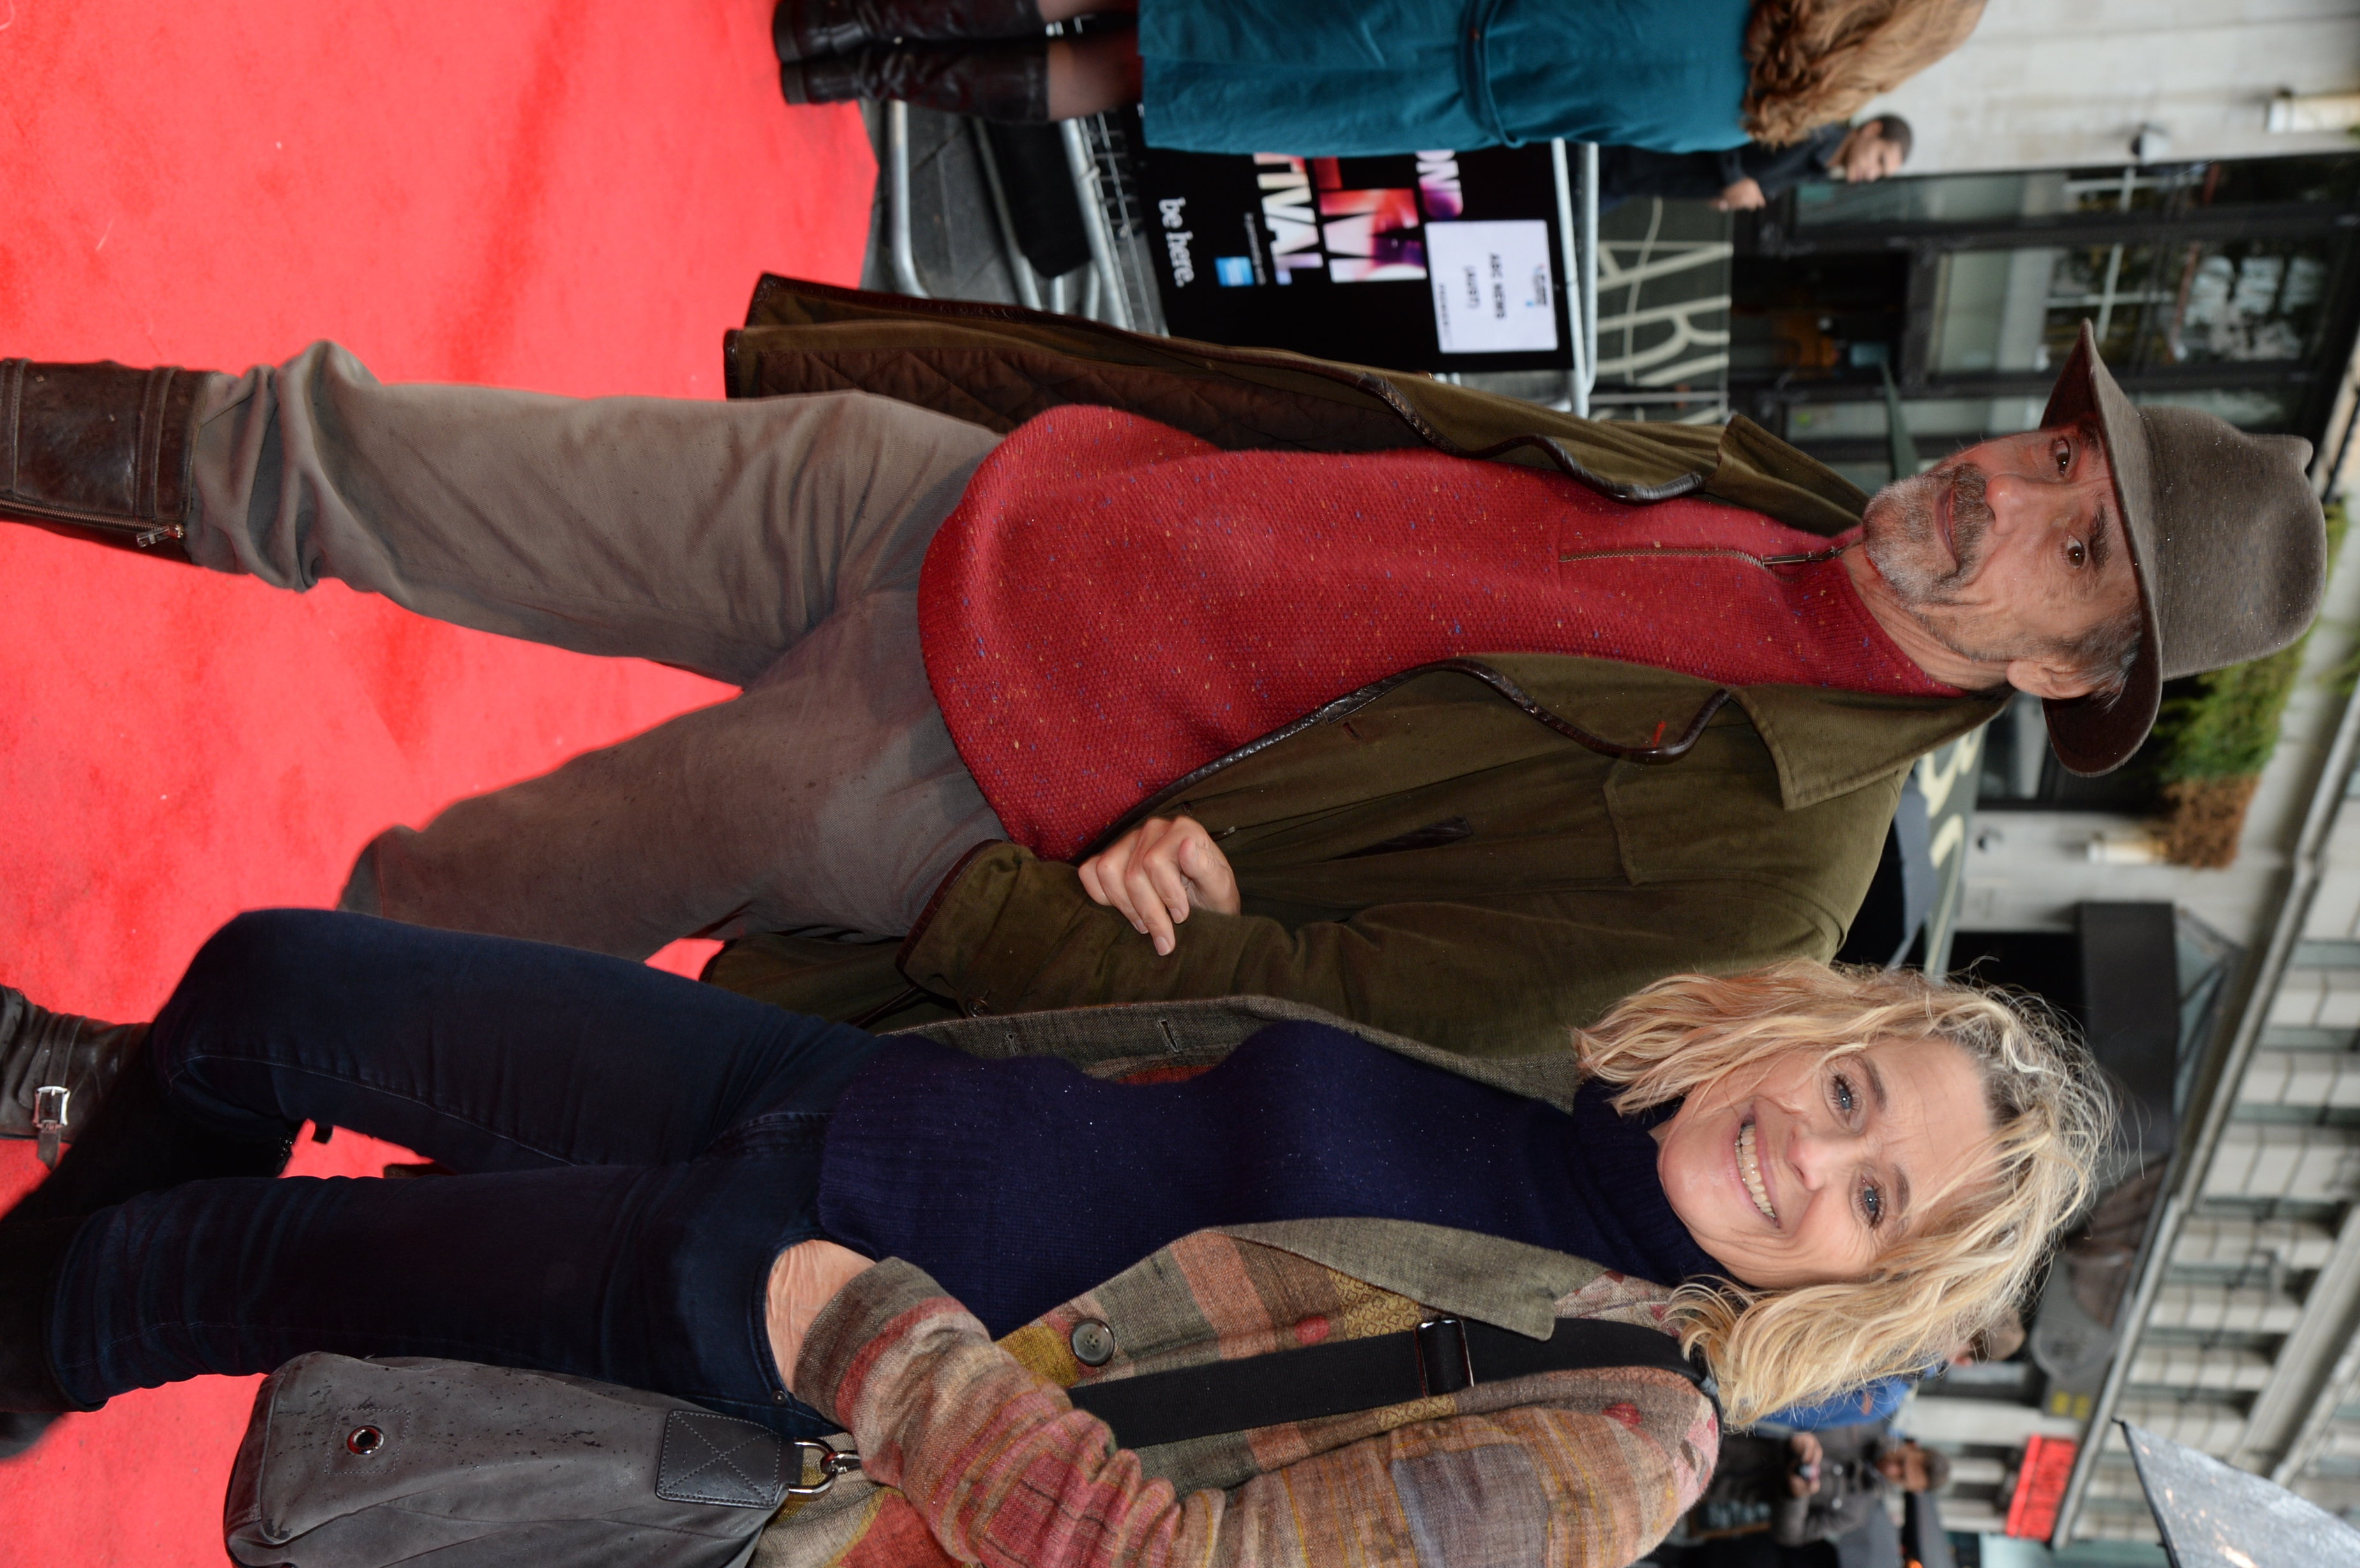 Jeremy Irons and Sinead Cusack arrive at the 57th BFI London Film Festival opening of 